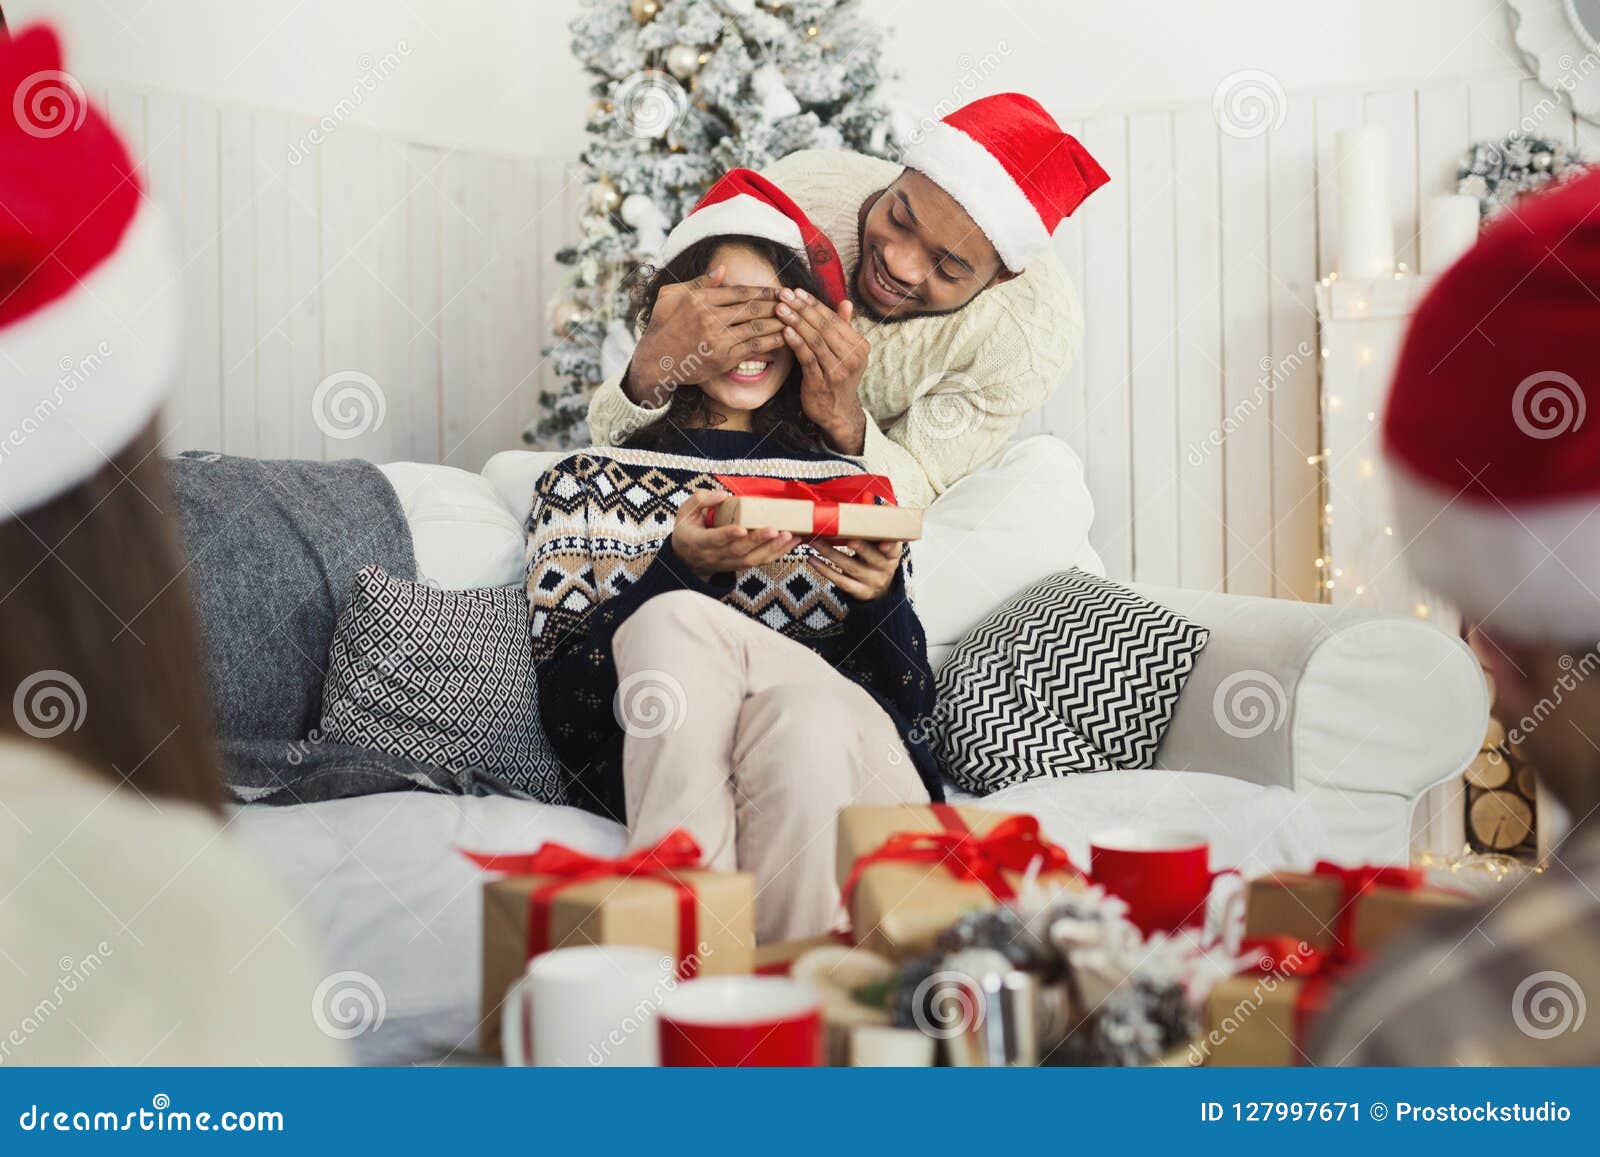 Handsome Man Surprising Girl With Christmas Present Stock Image Image Of Present Receiving